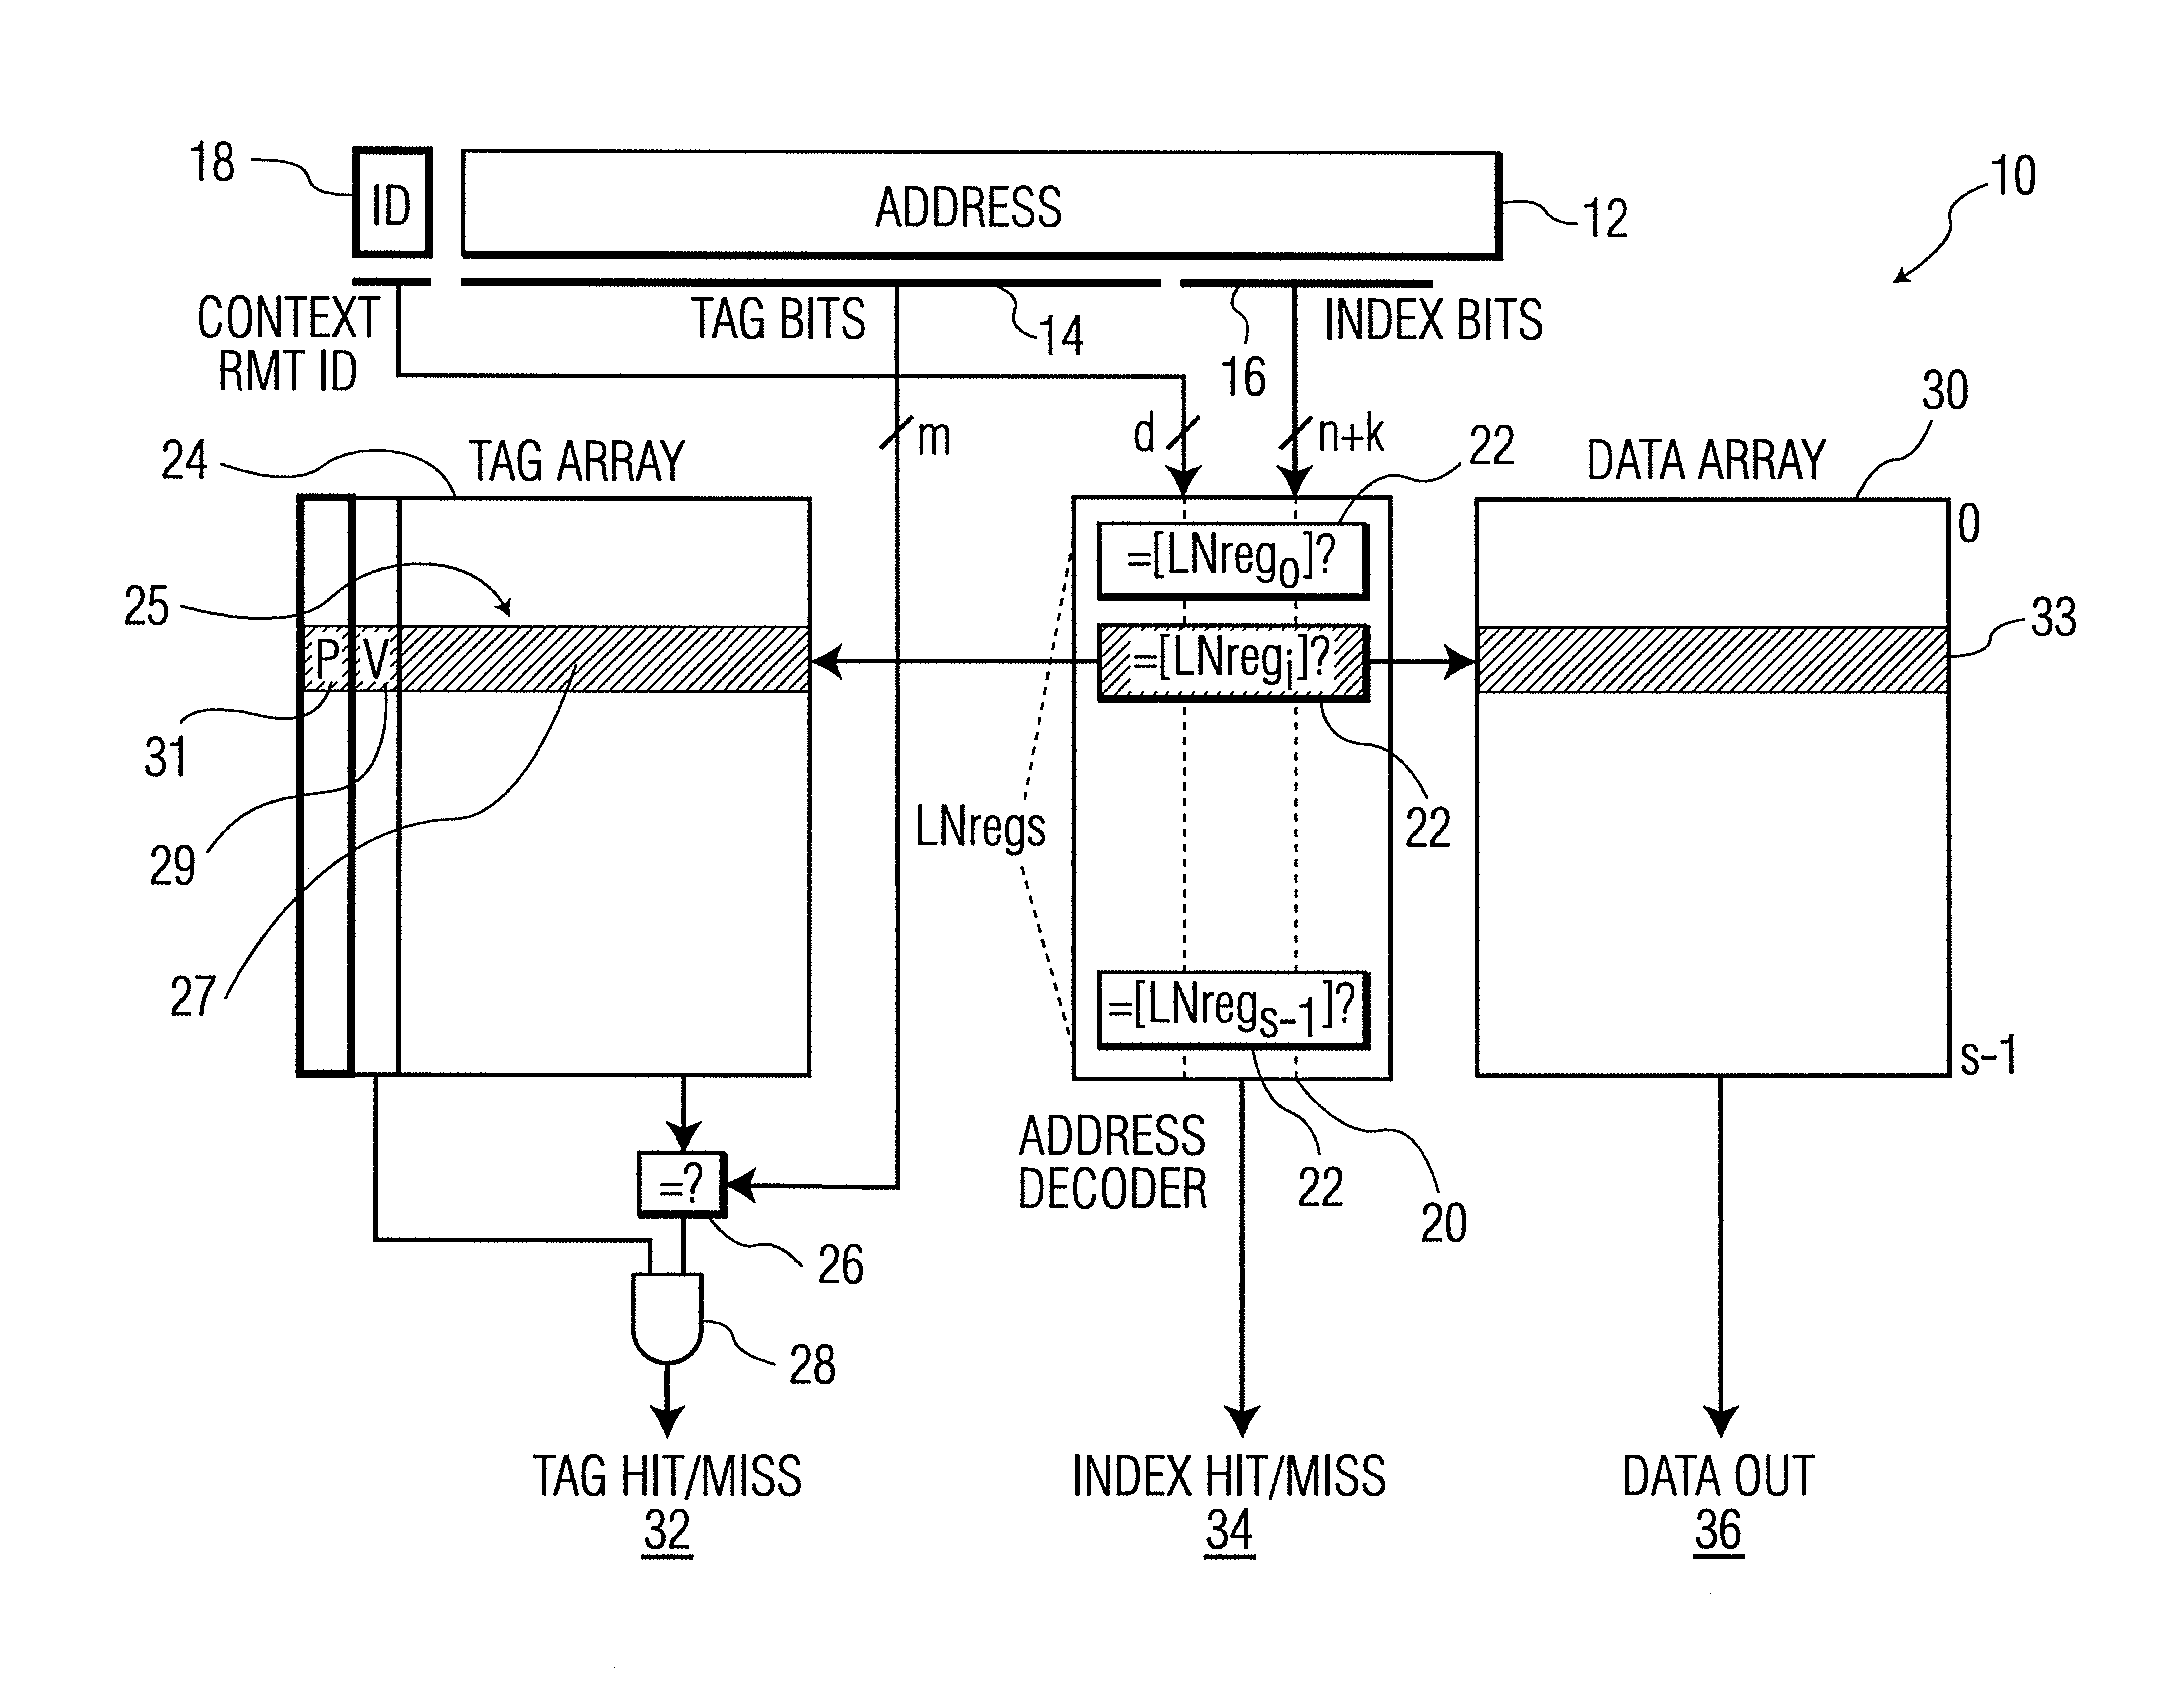 Cache memory having enhanced performance and security features